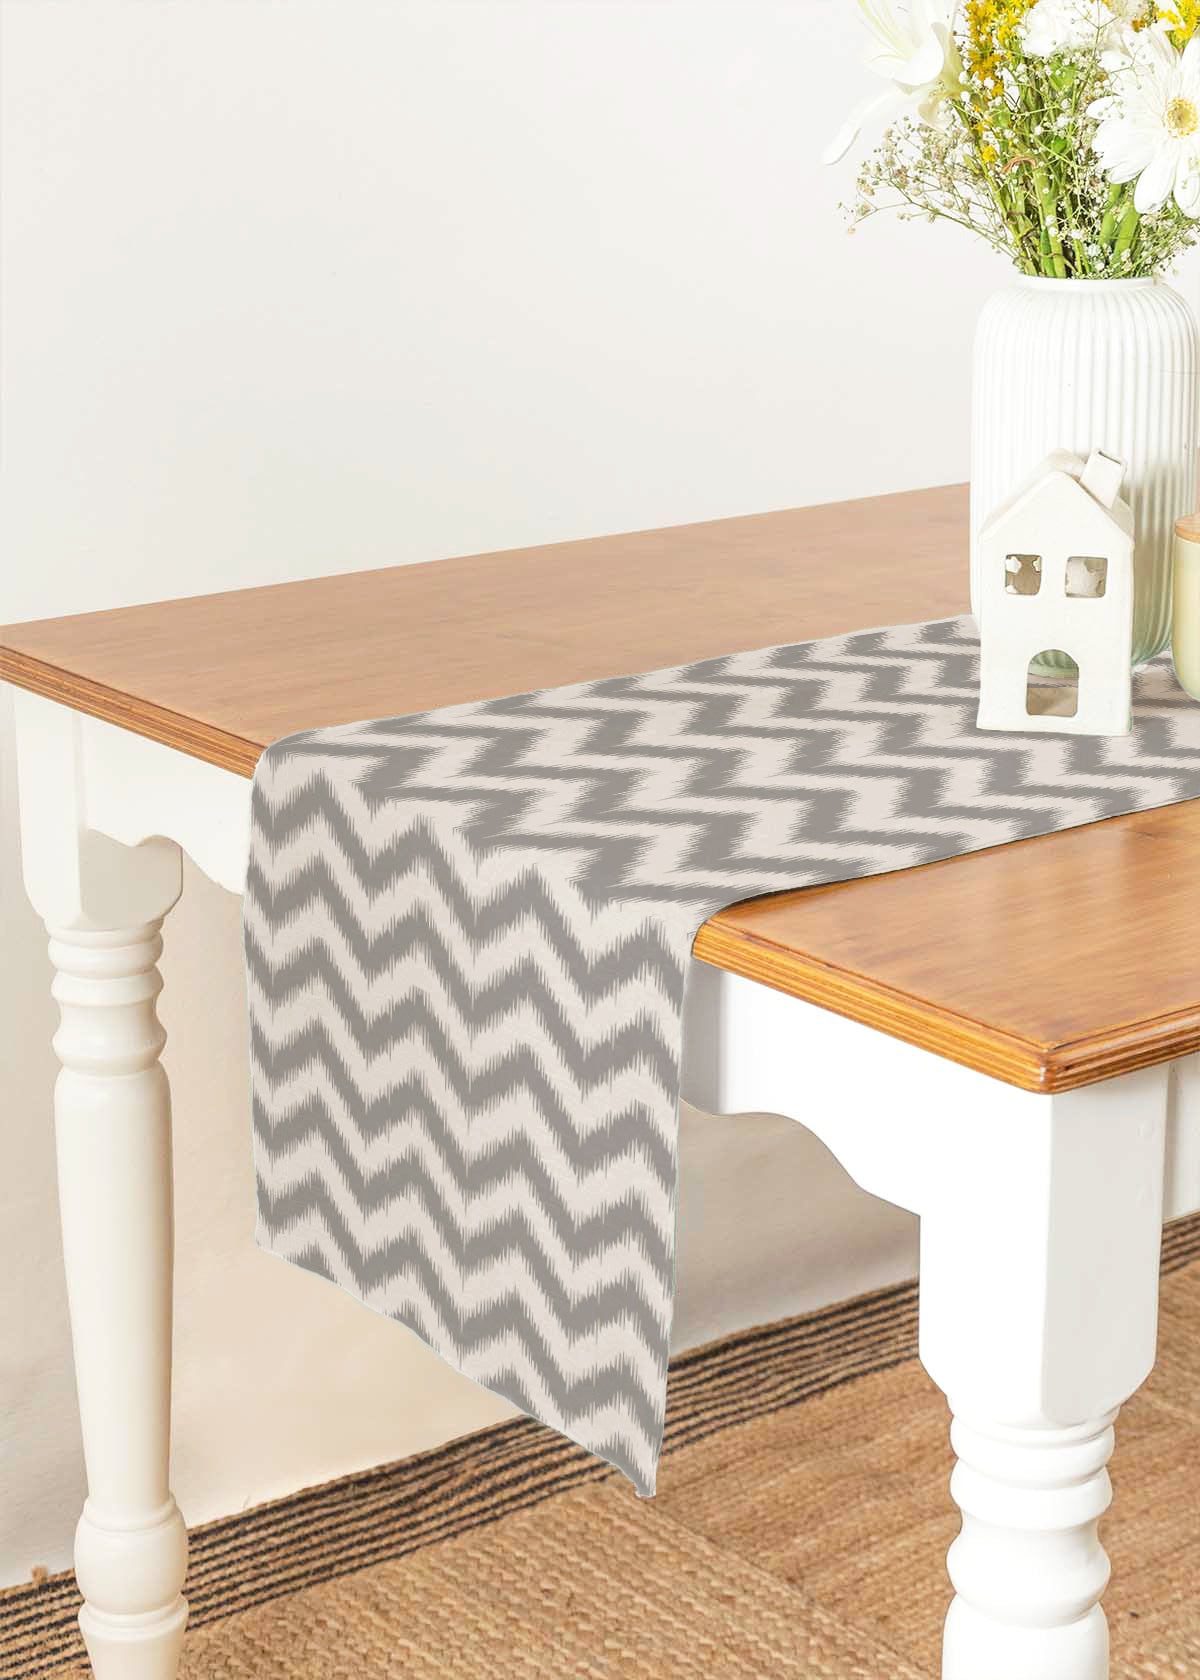 Ikat 100% cotton customisable geometric table Runner for dining - Grey